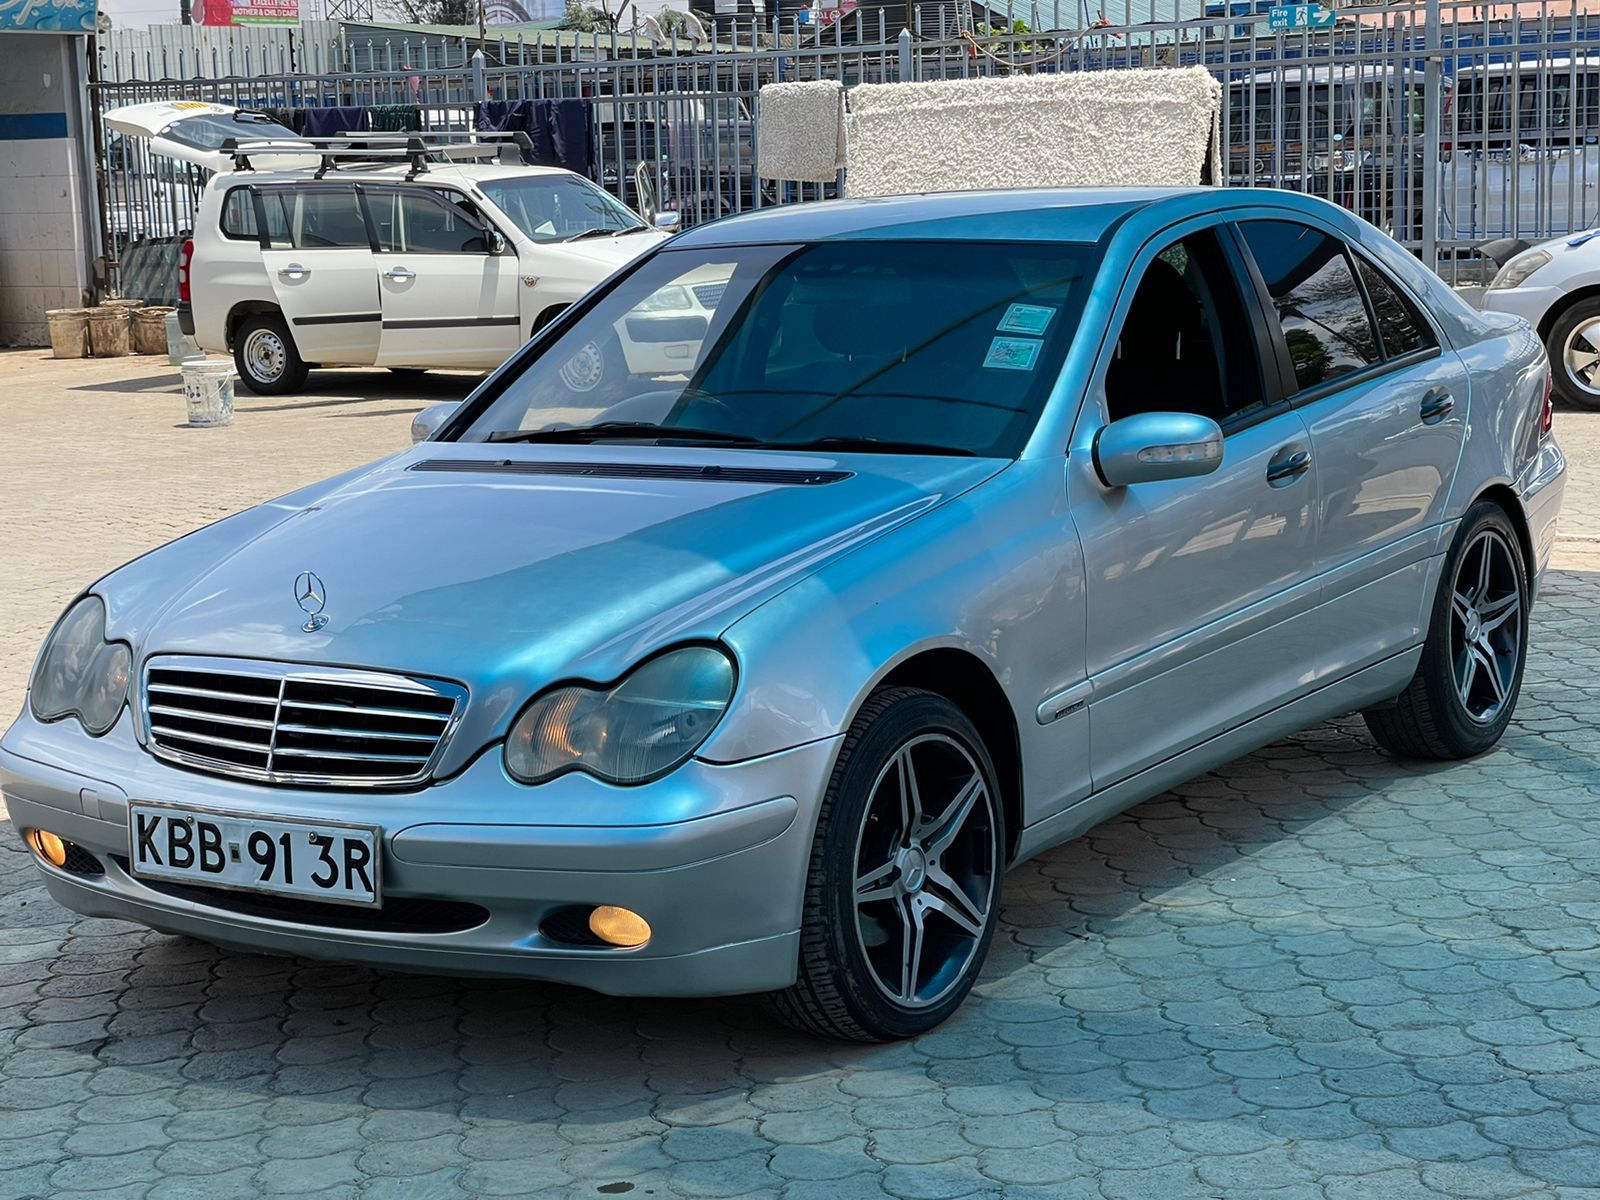 Mercedes Benz C180 2003 You Pay 30% DEPOSIT Trade in OK